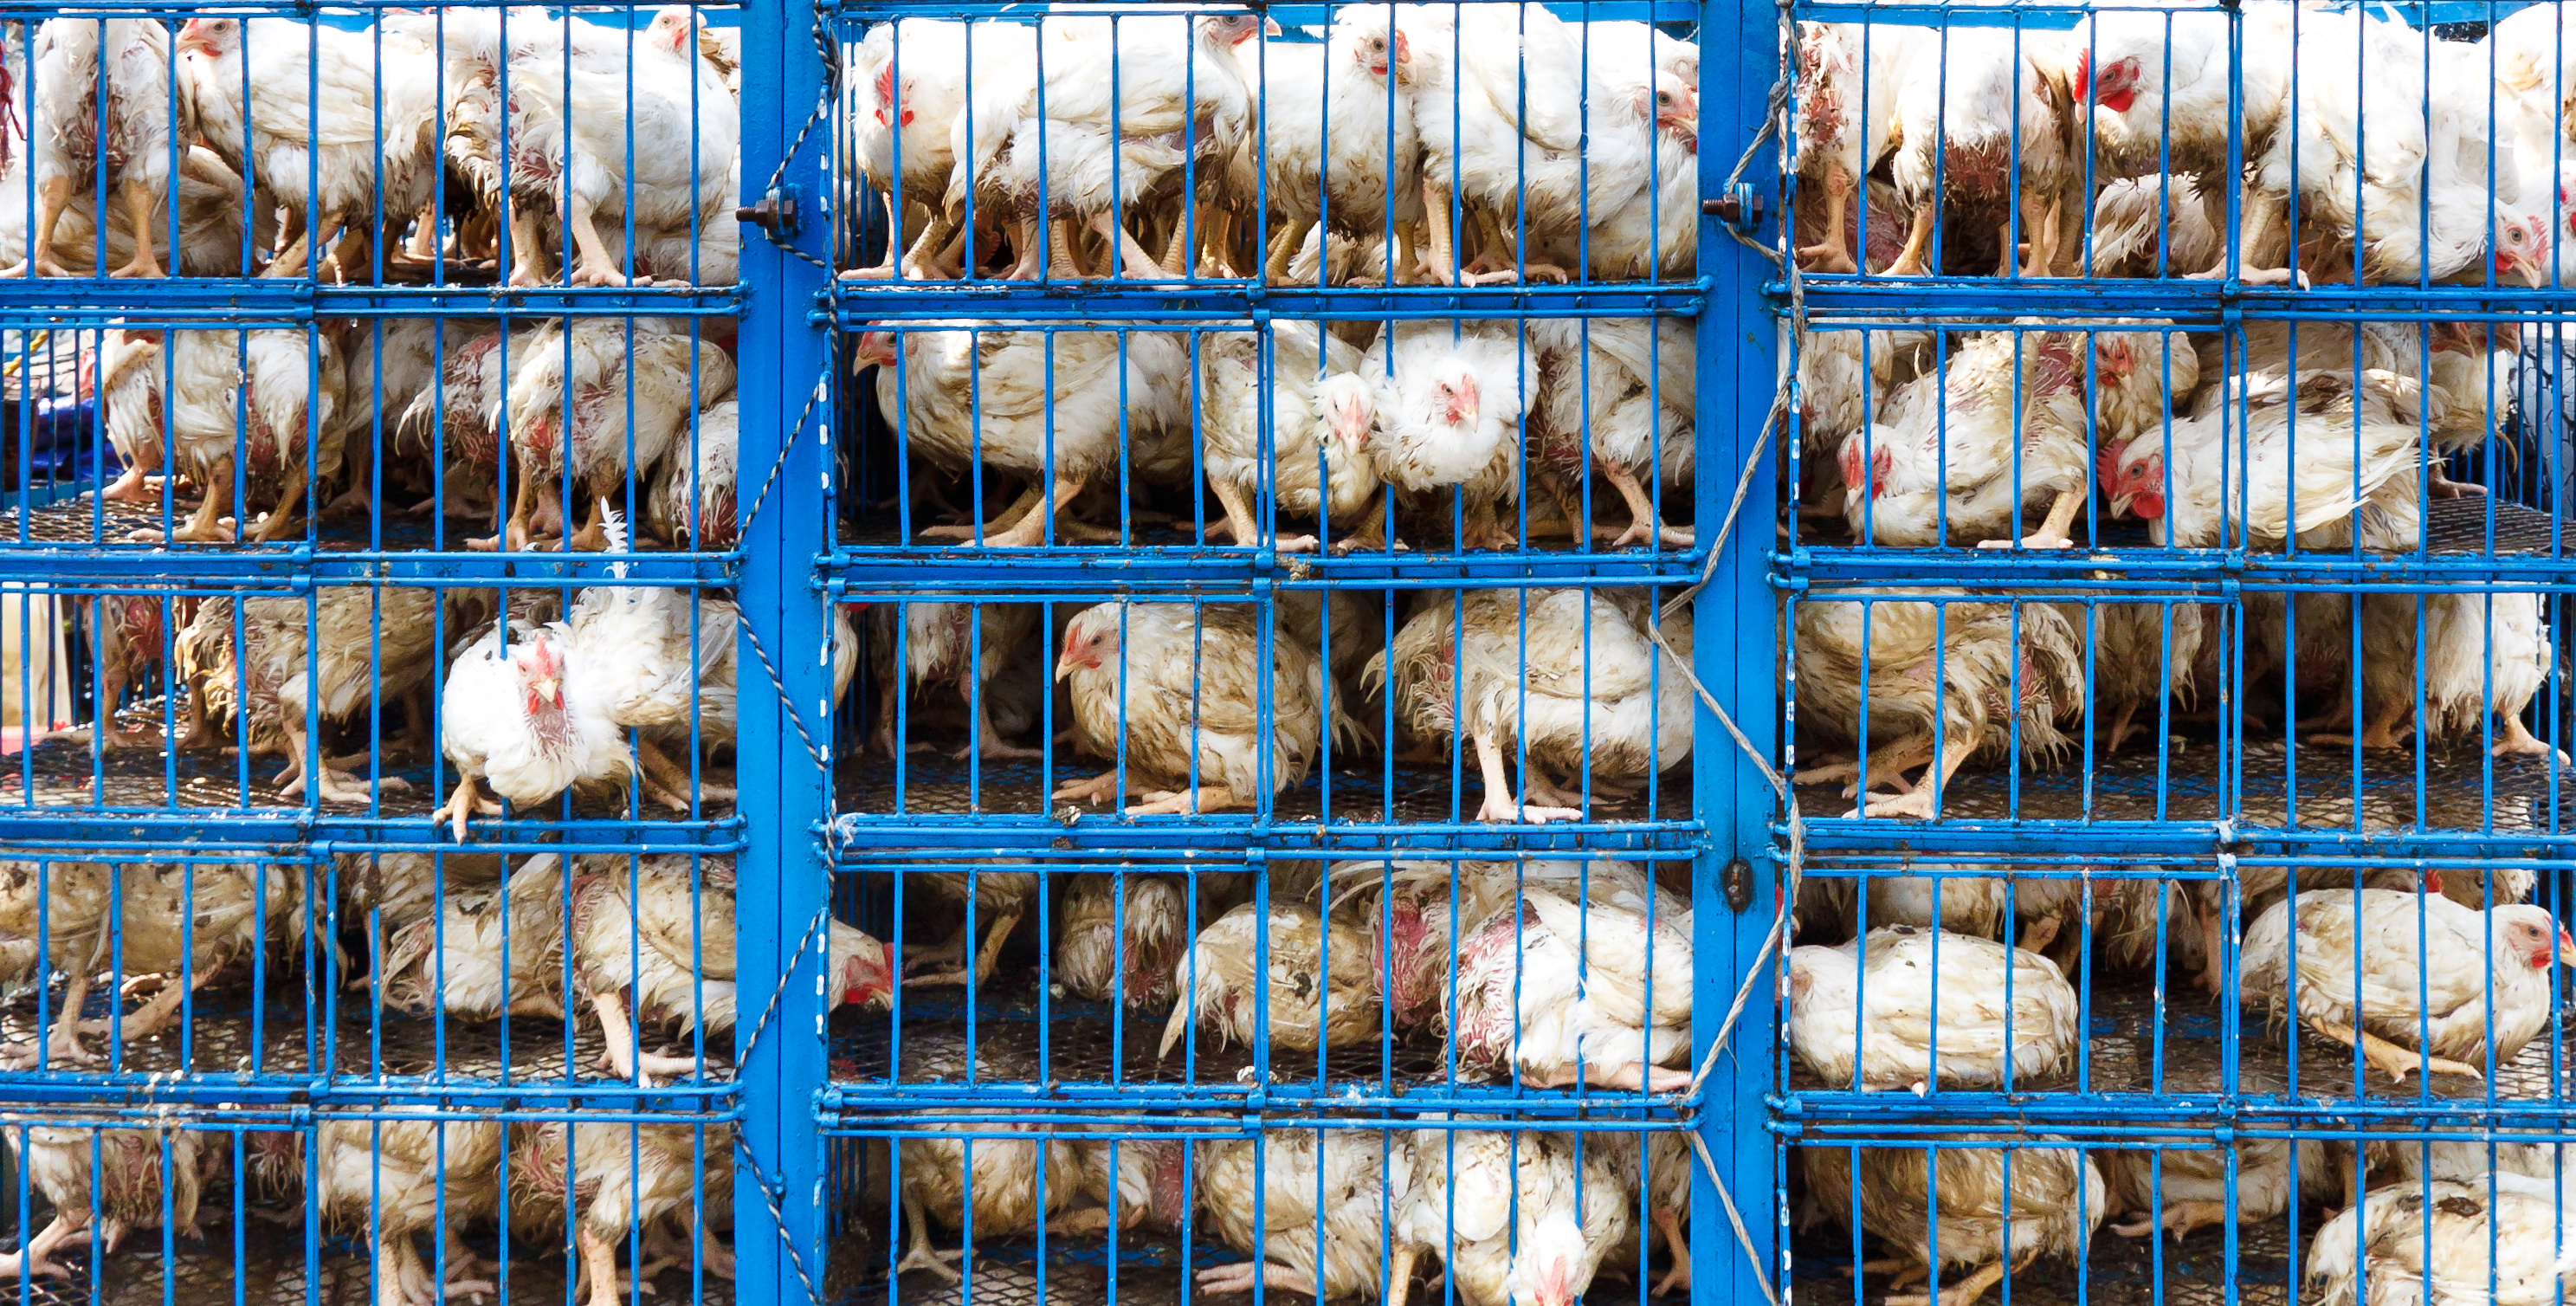 poultry loaded onto a truck for live transport